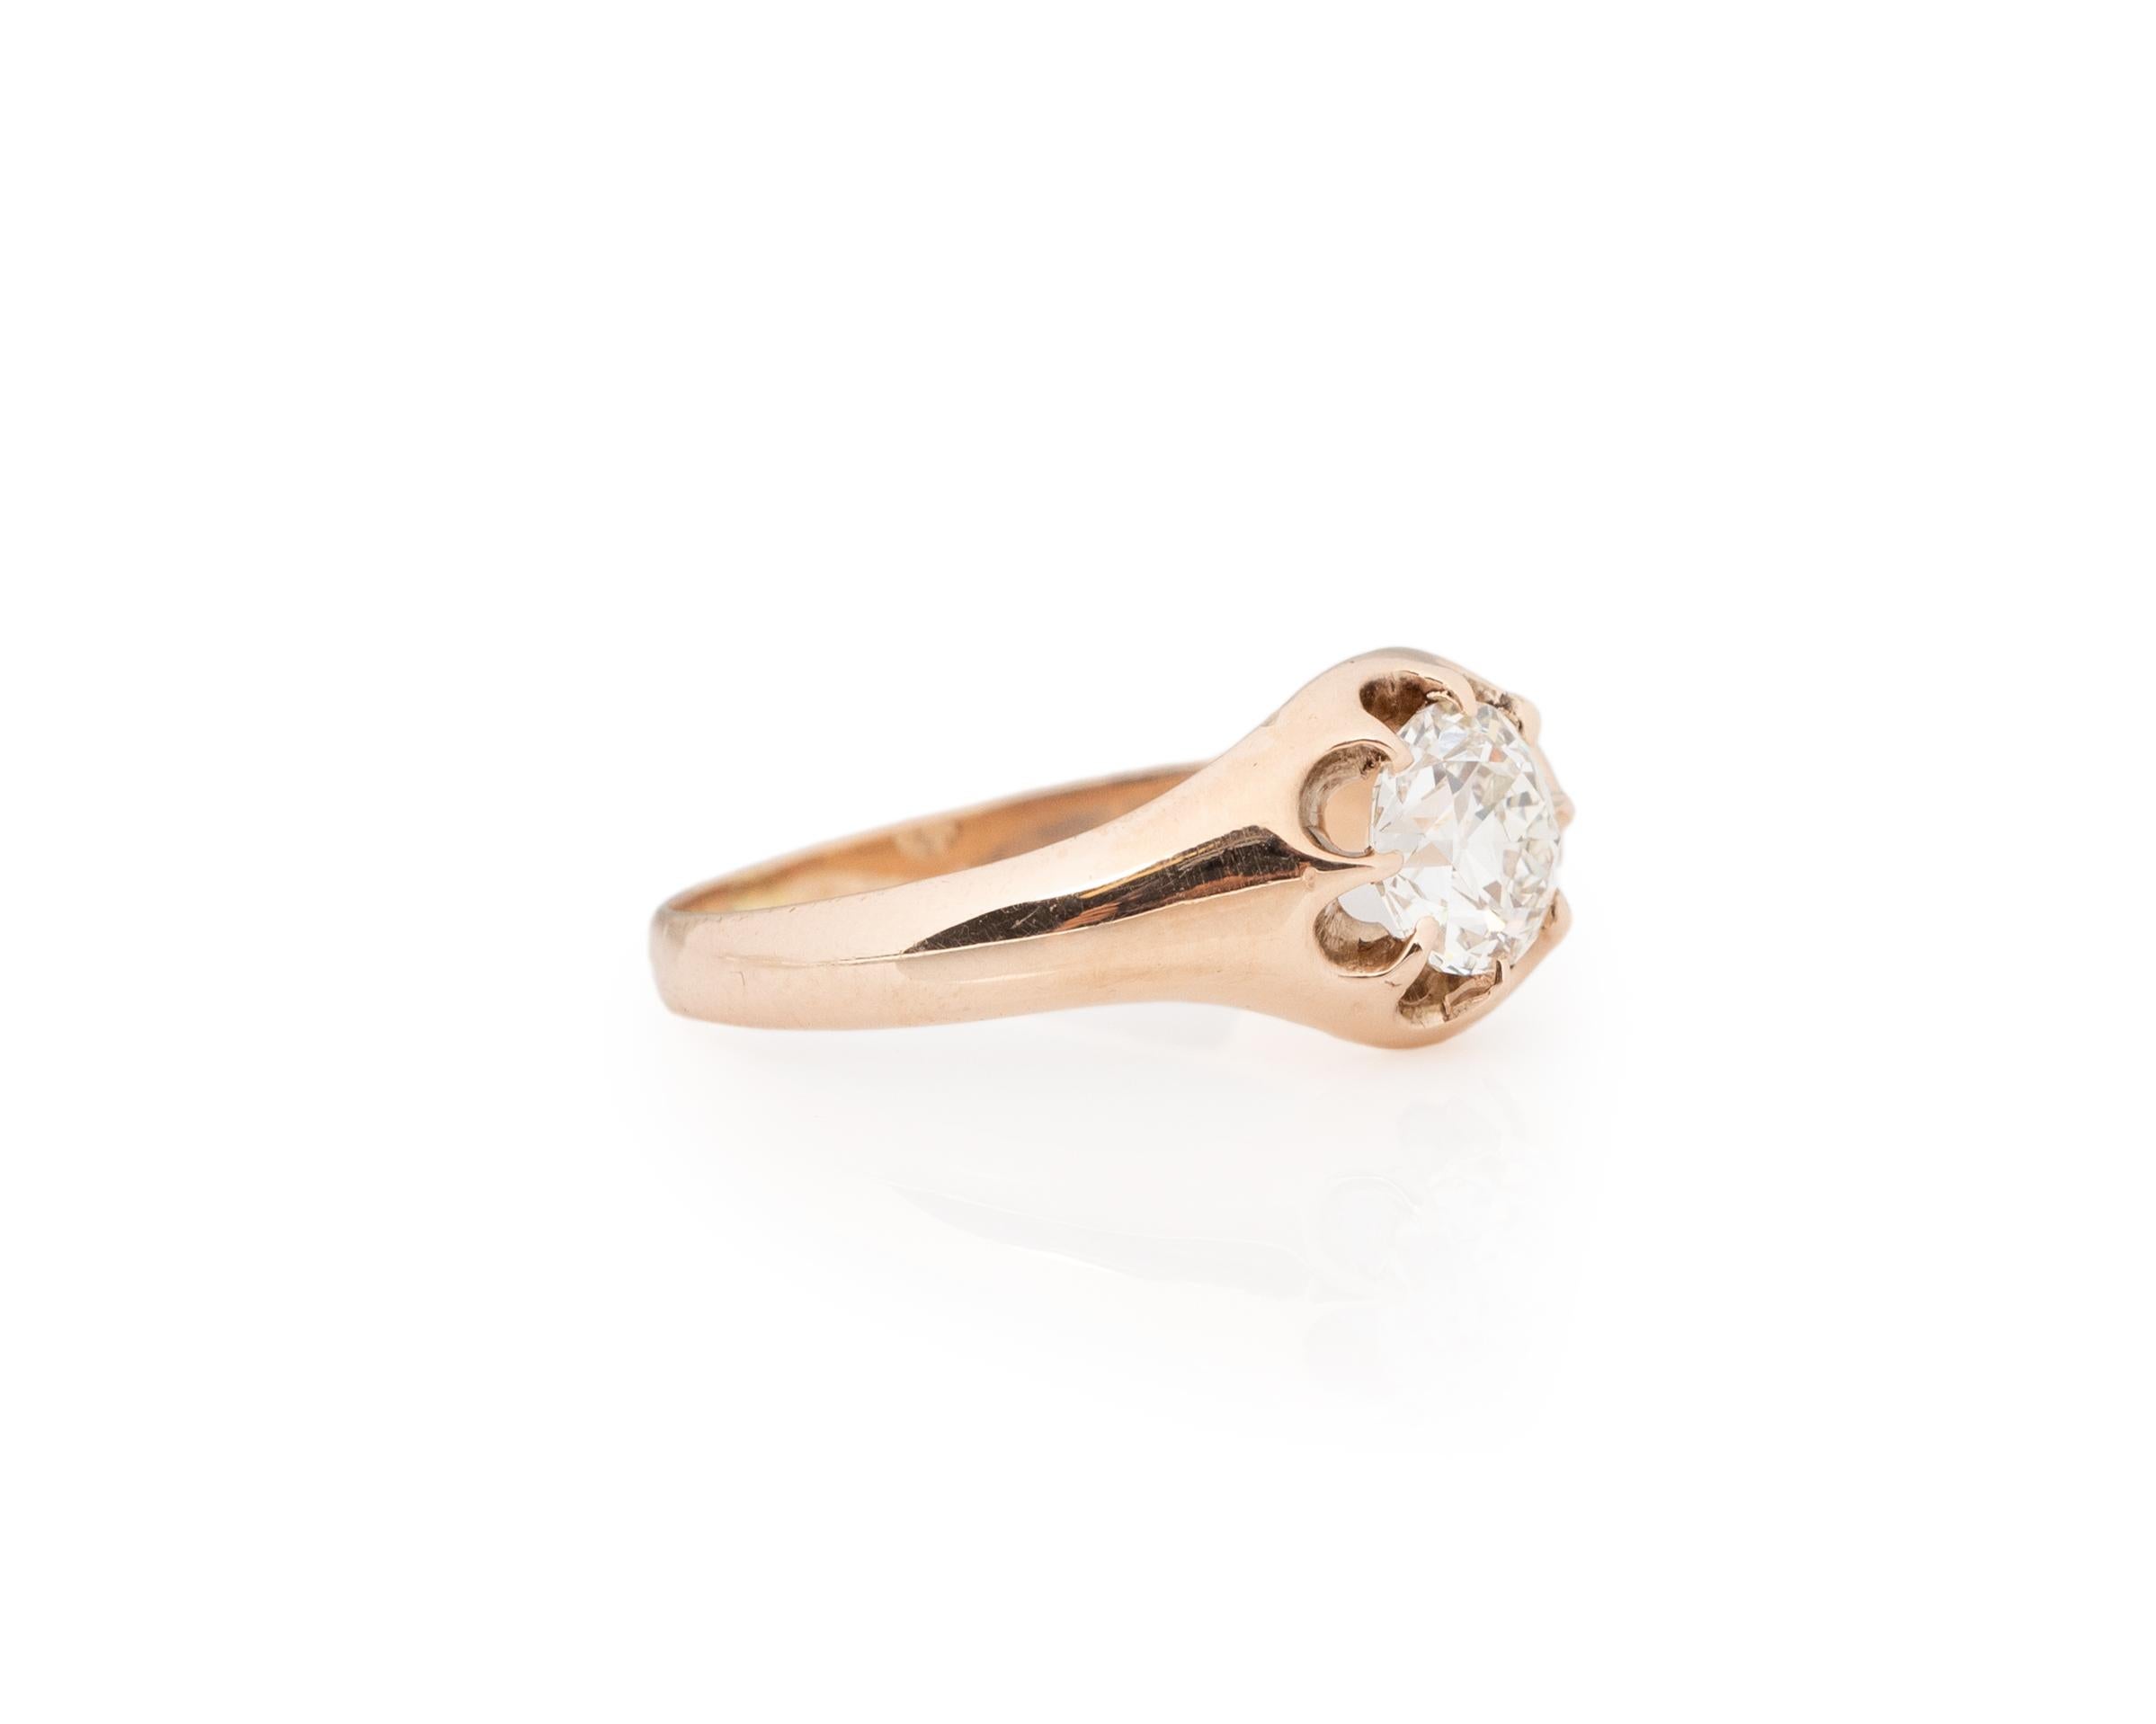 
Ring Size: 6.75
Metal Type: 14K Yellow Gold [Hallmarked, and Tested]
Weight: 2.6 grams
Center Diamond Details:
GIA LAB REPORT #:2225823832
Weight: .81ct
Cut: Old European
Color: H
Clarity: VS2
Measurements: 5.99mm x 5.83mm x 3.71mm
Finger to Top of